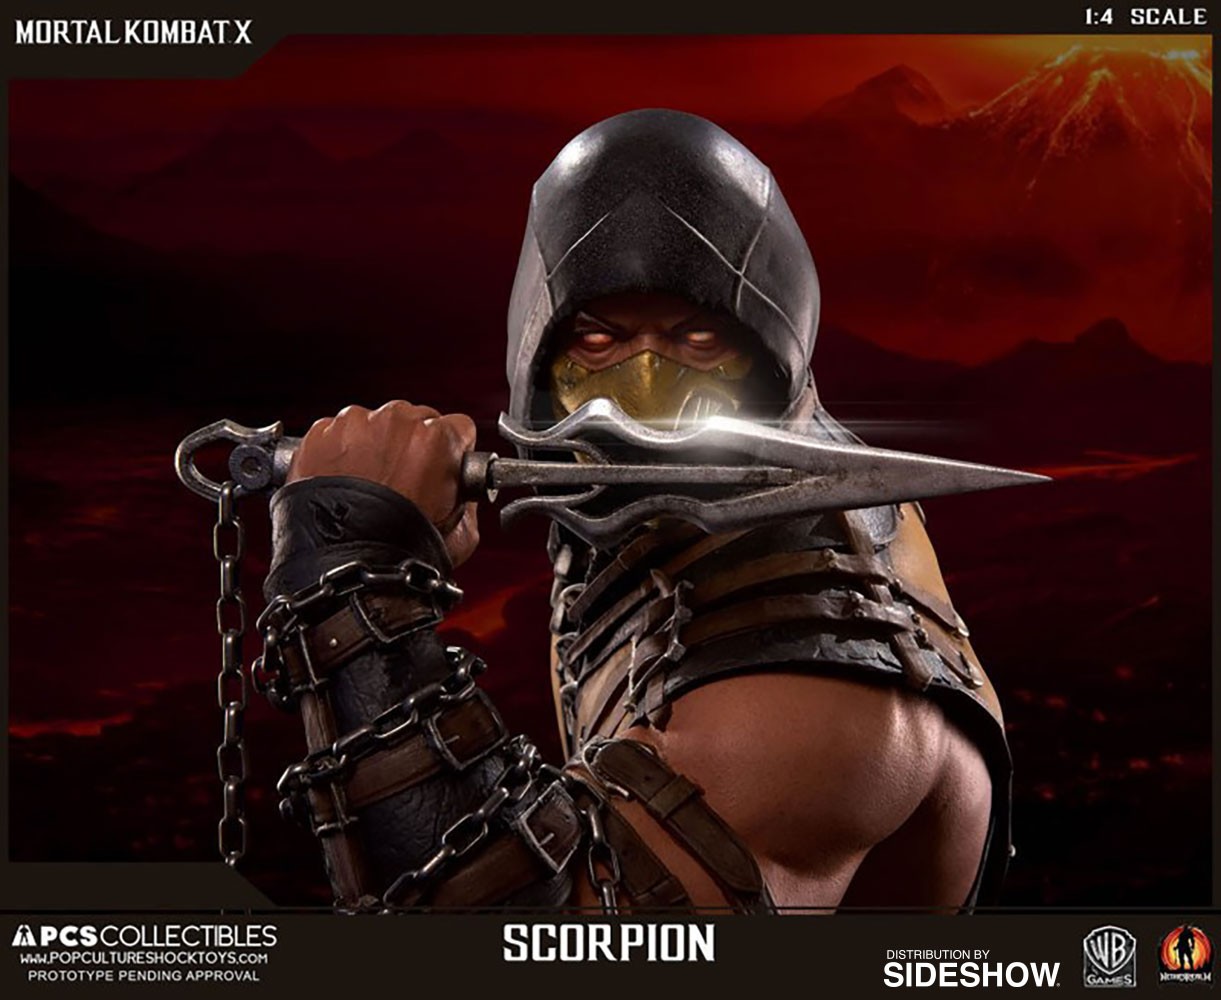 Scorpion Exclusive Edition View 23